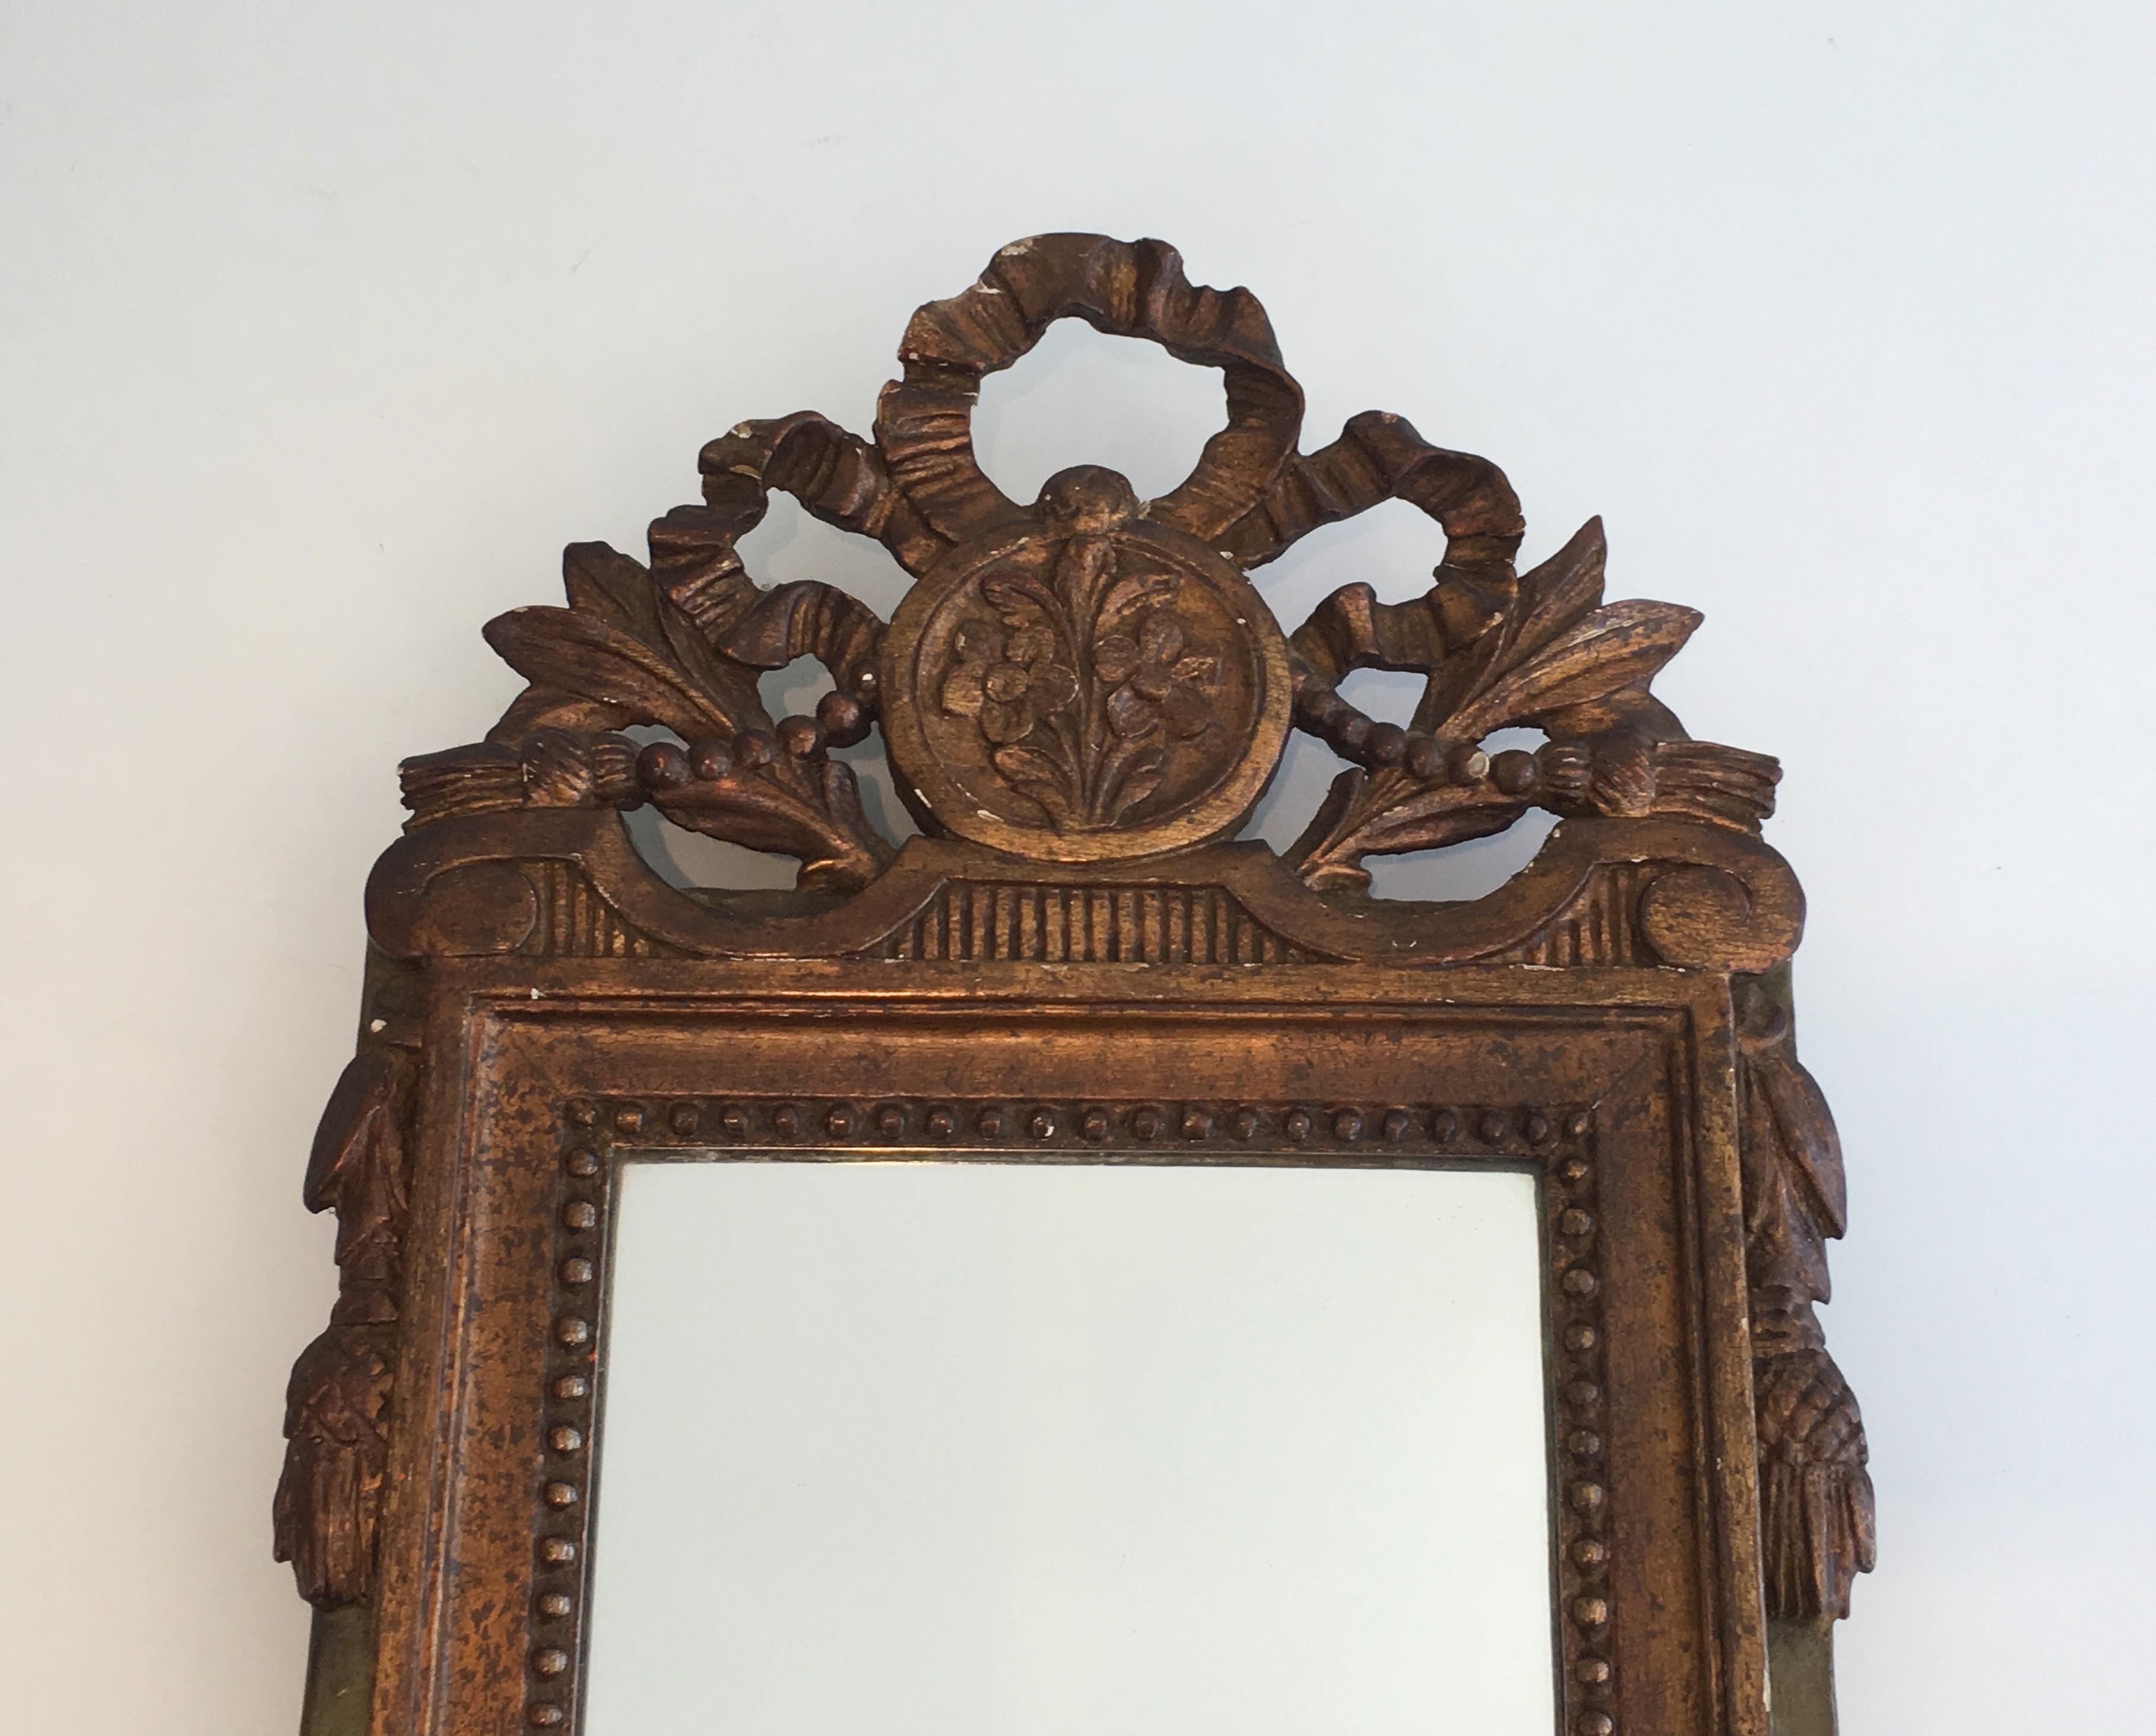 Louis the xvi Style Gilt and Painted Wood Mirror, French, 19th Century For Sale 3